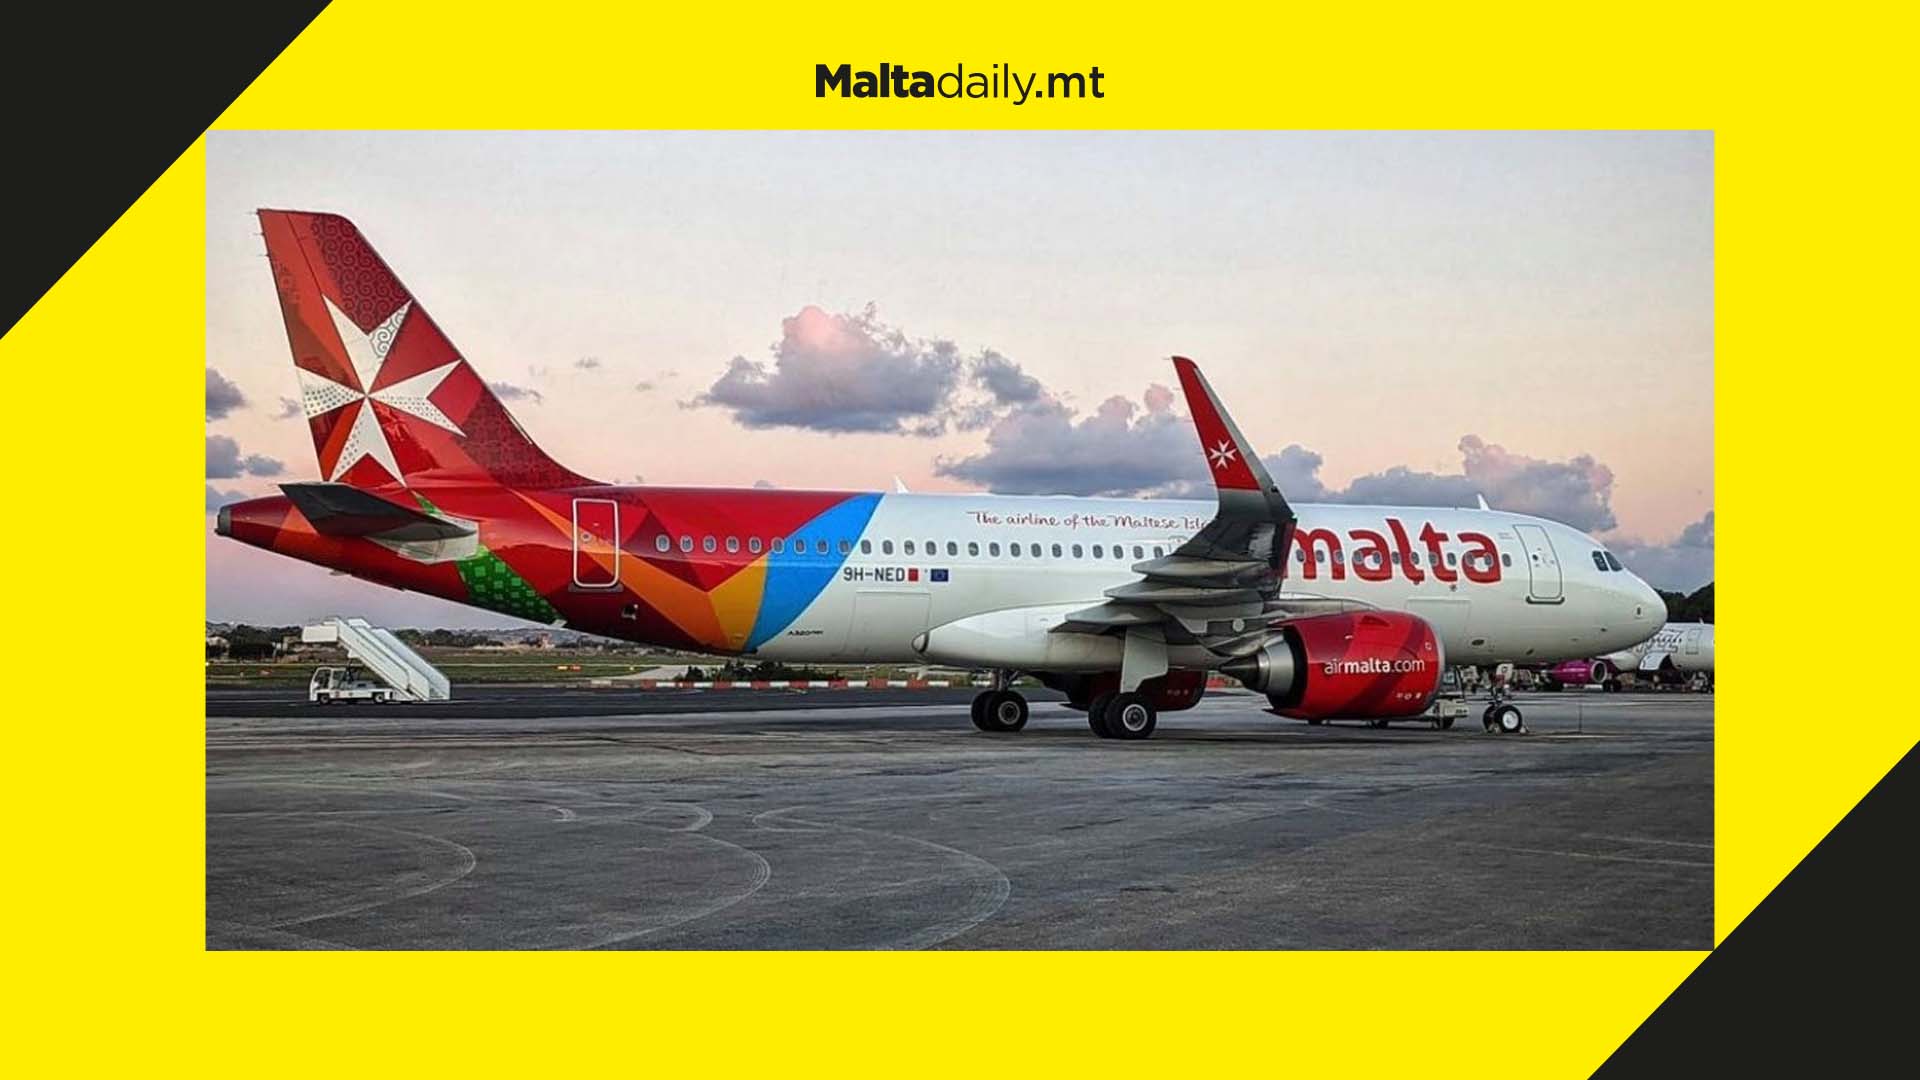 Few workers apply for Air Malta’s voluntary transfer scheme, forcing extension